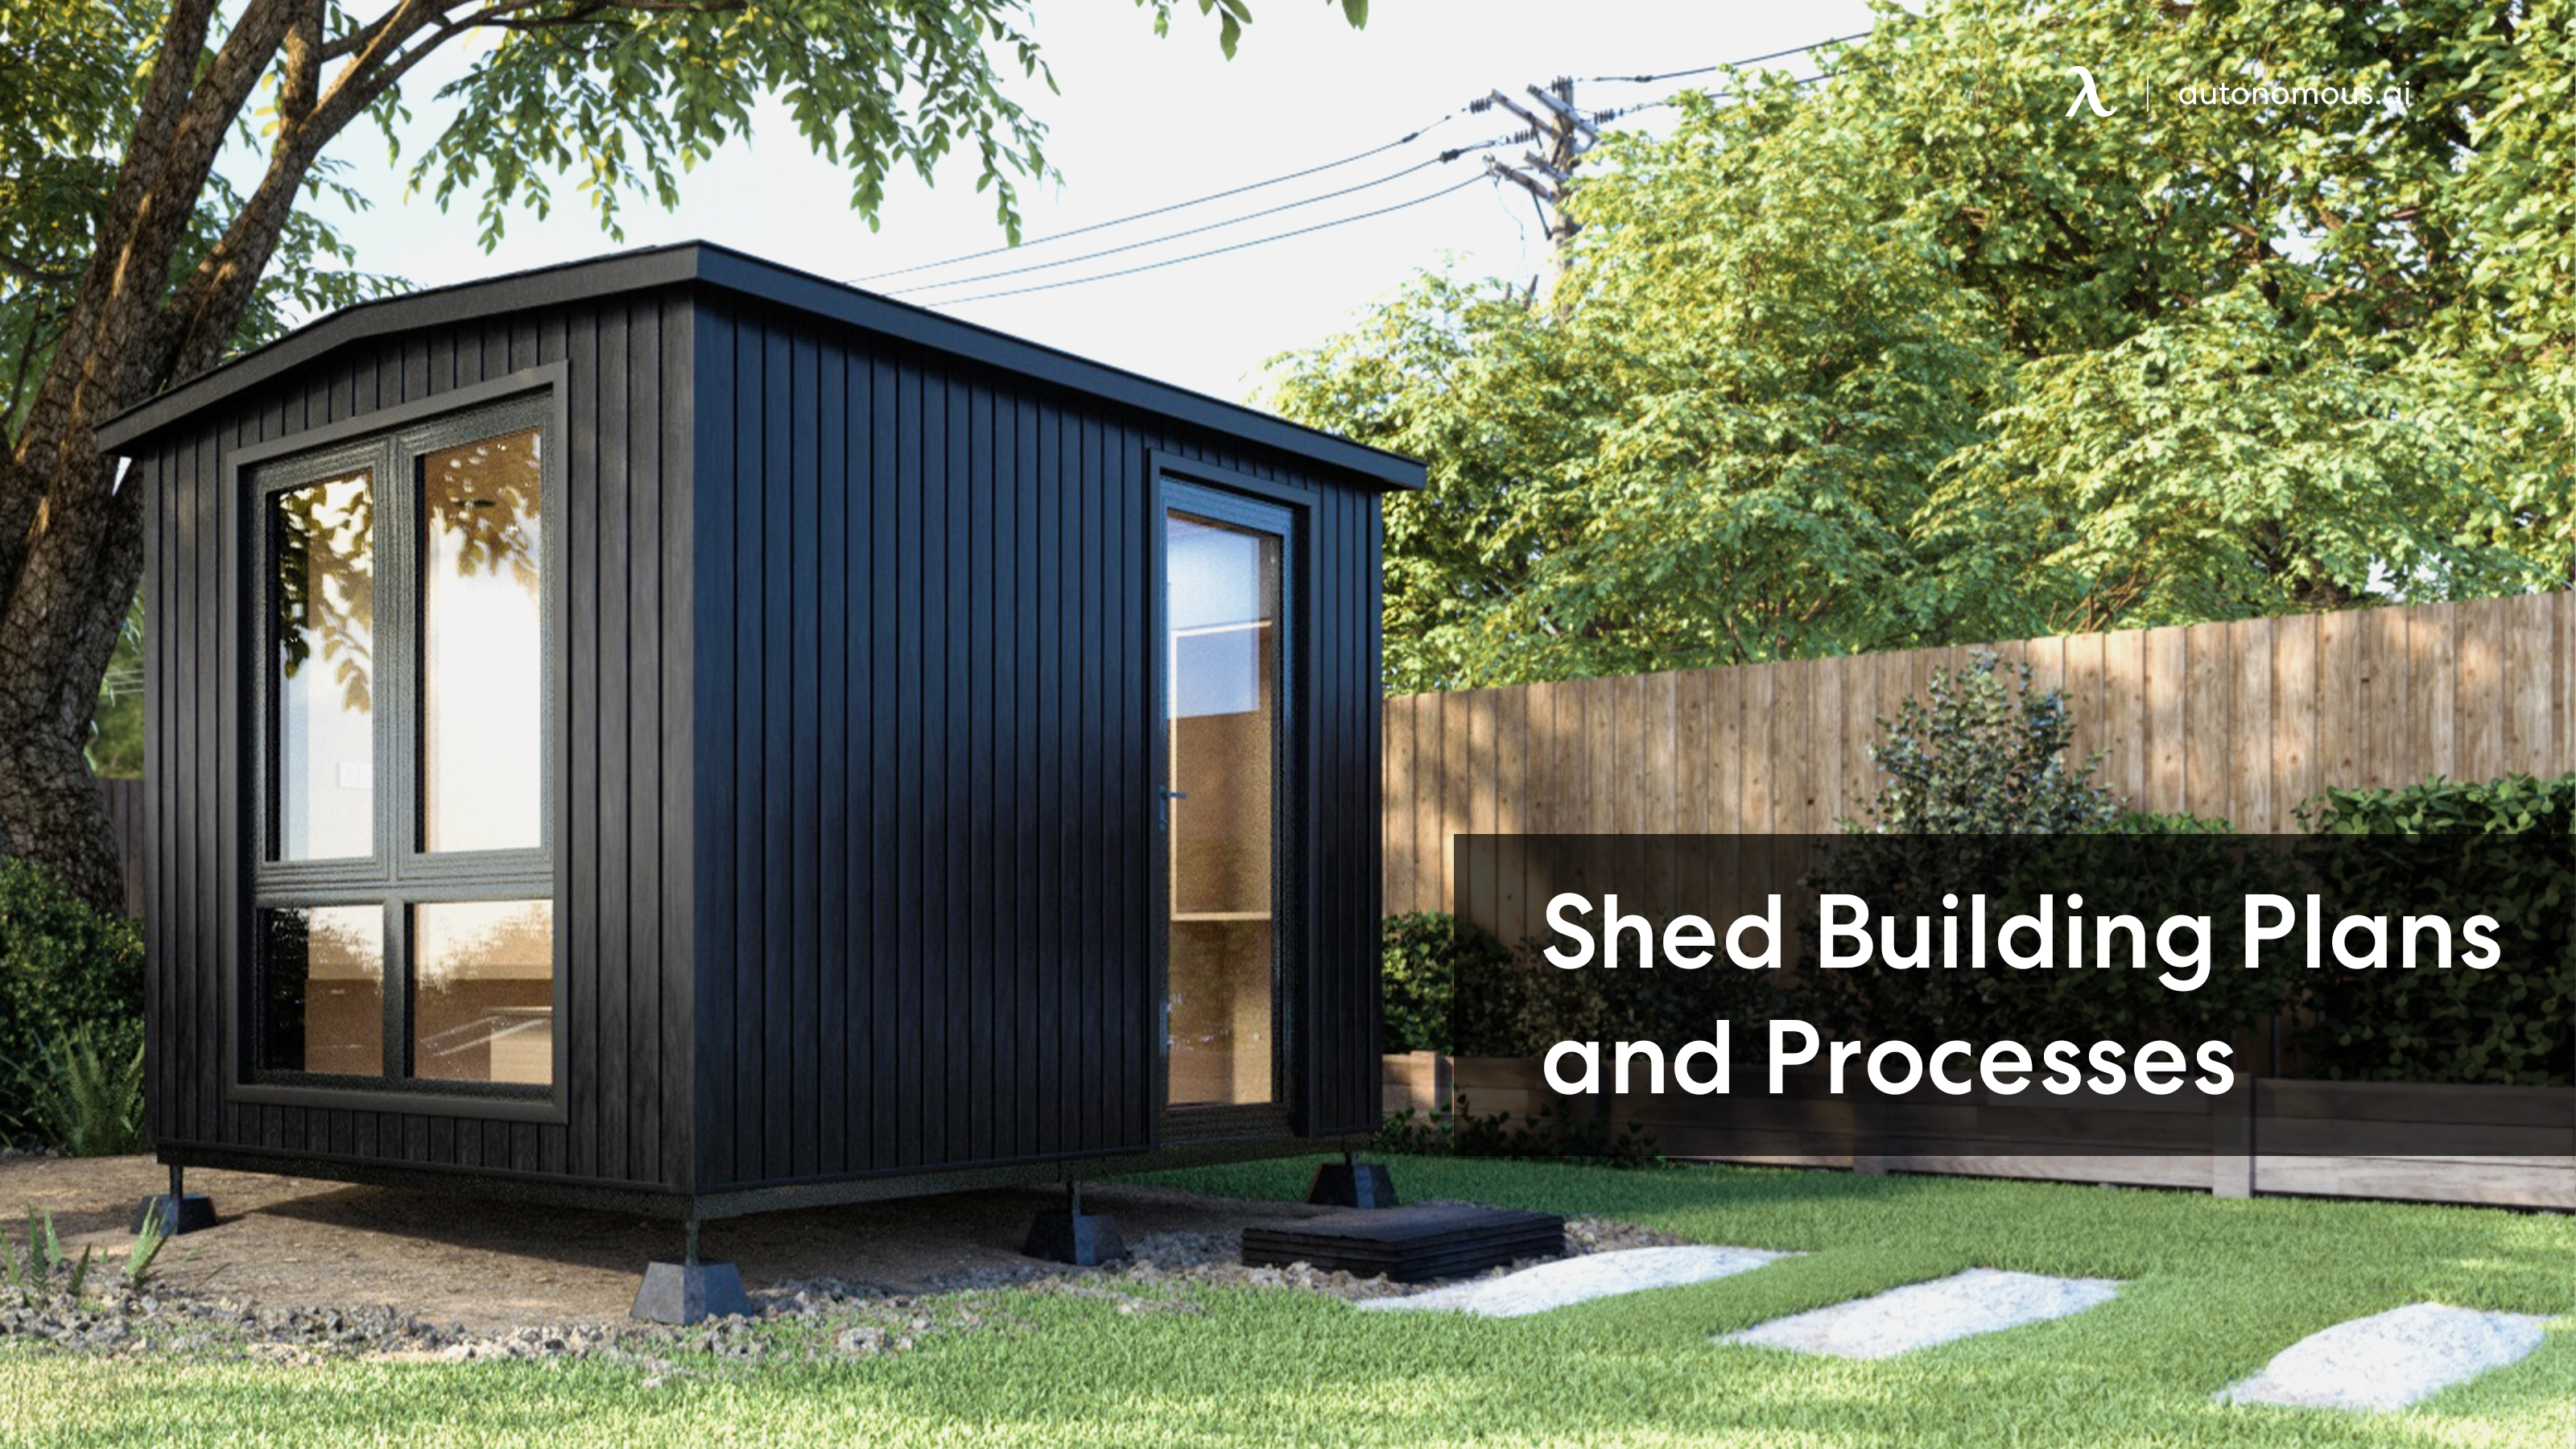 Full Guide to Your Own Shed Building Plans and Processes in 2023